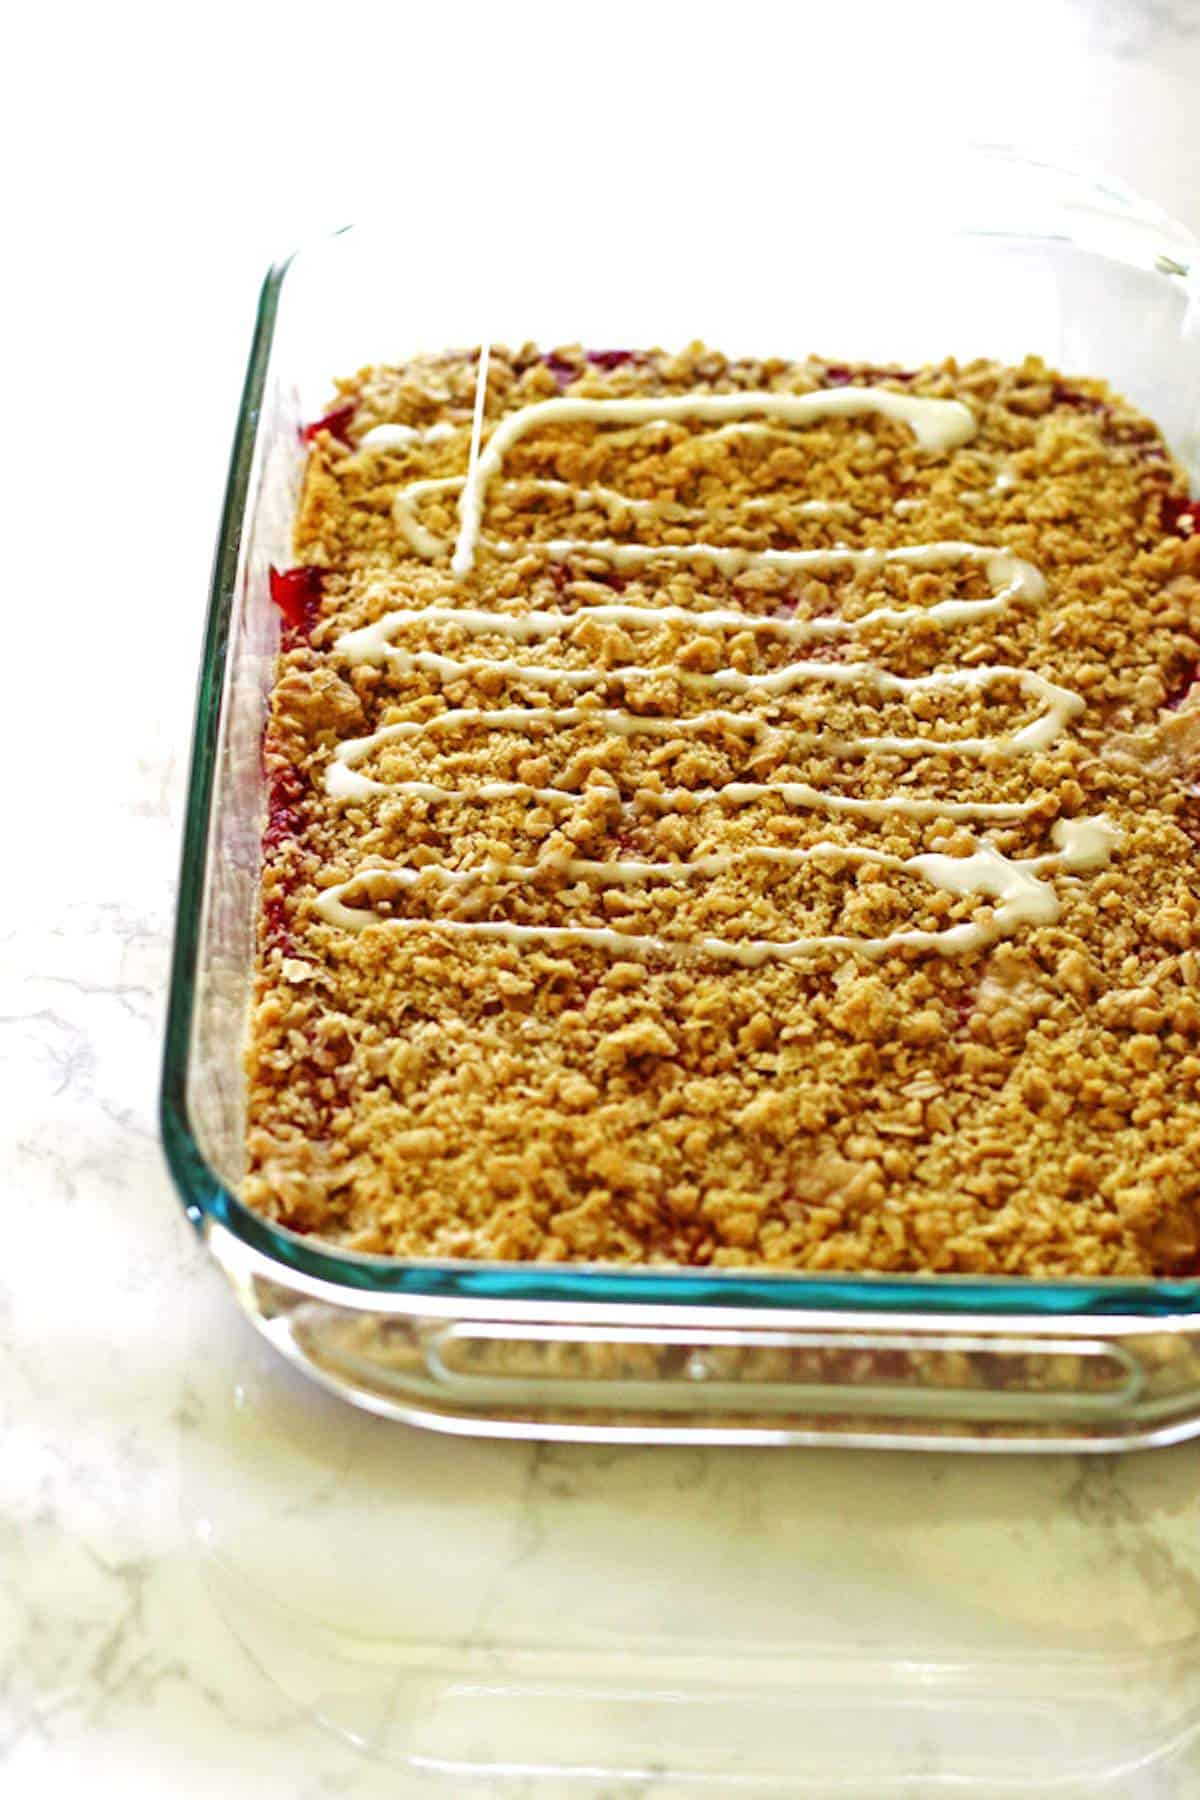 A pan of strawberry rhubarb bars with crumble topping and a sweet glaze on top.